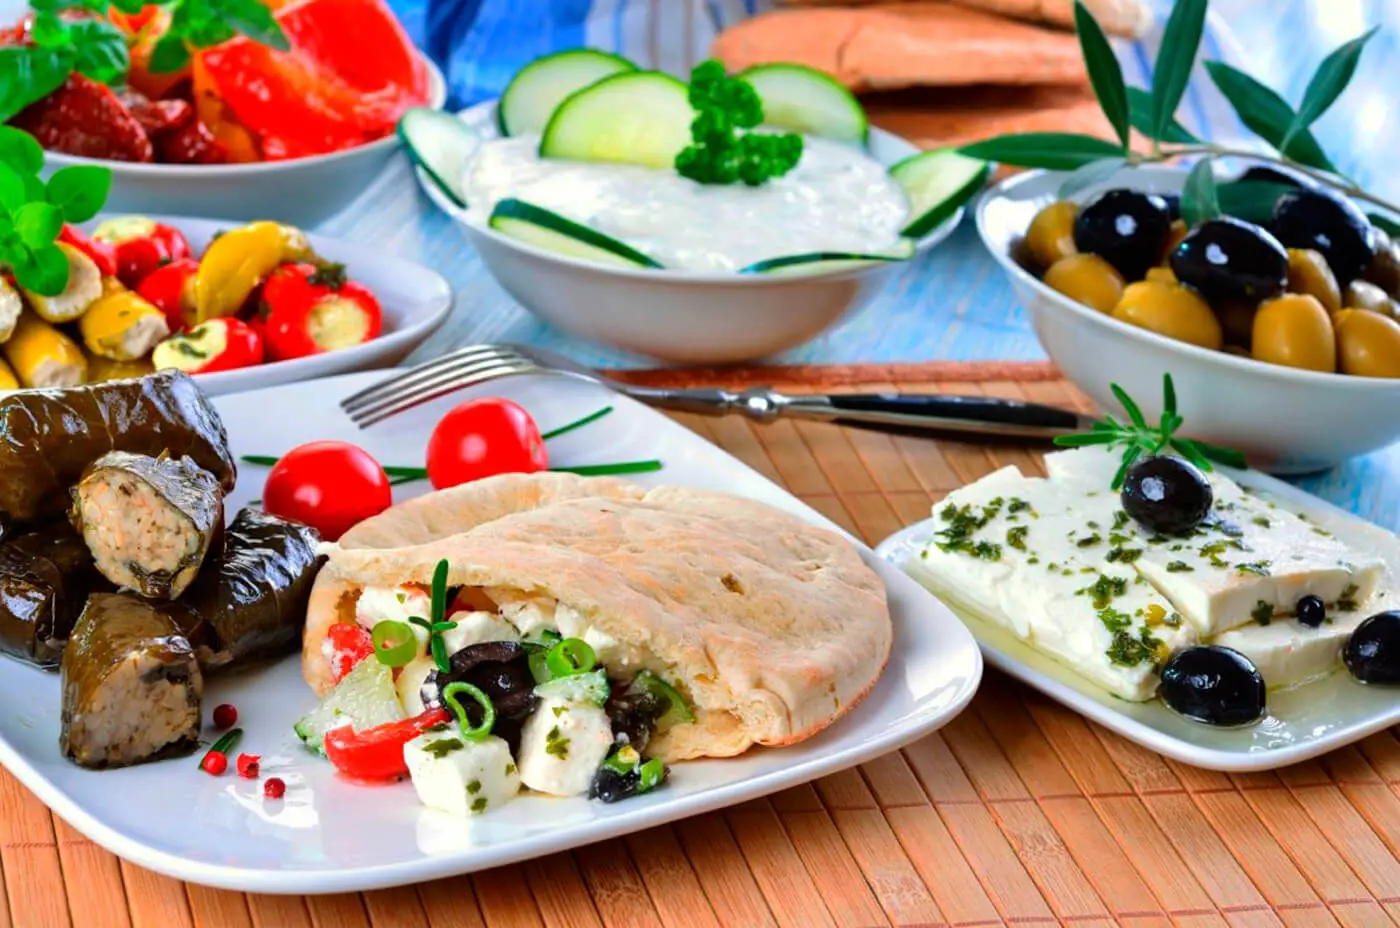 Tourist's guide to Greek cuisine - which dishes are worth trying?